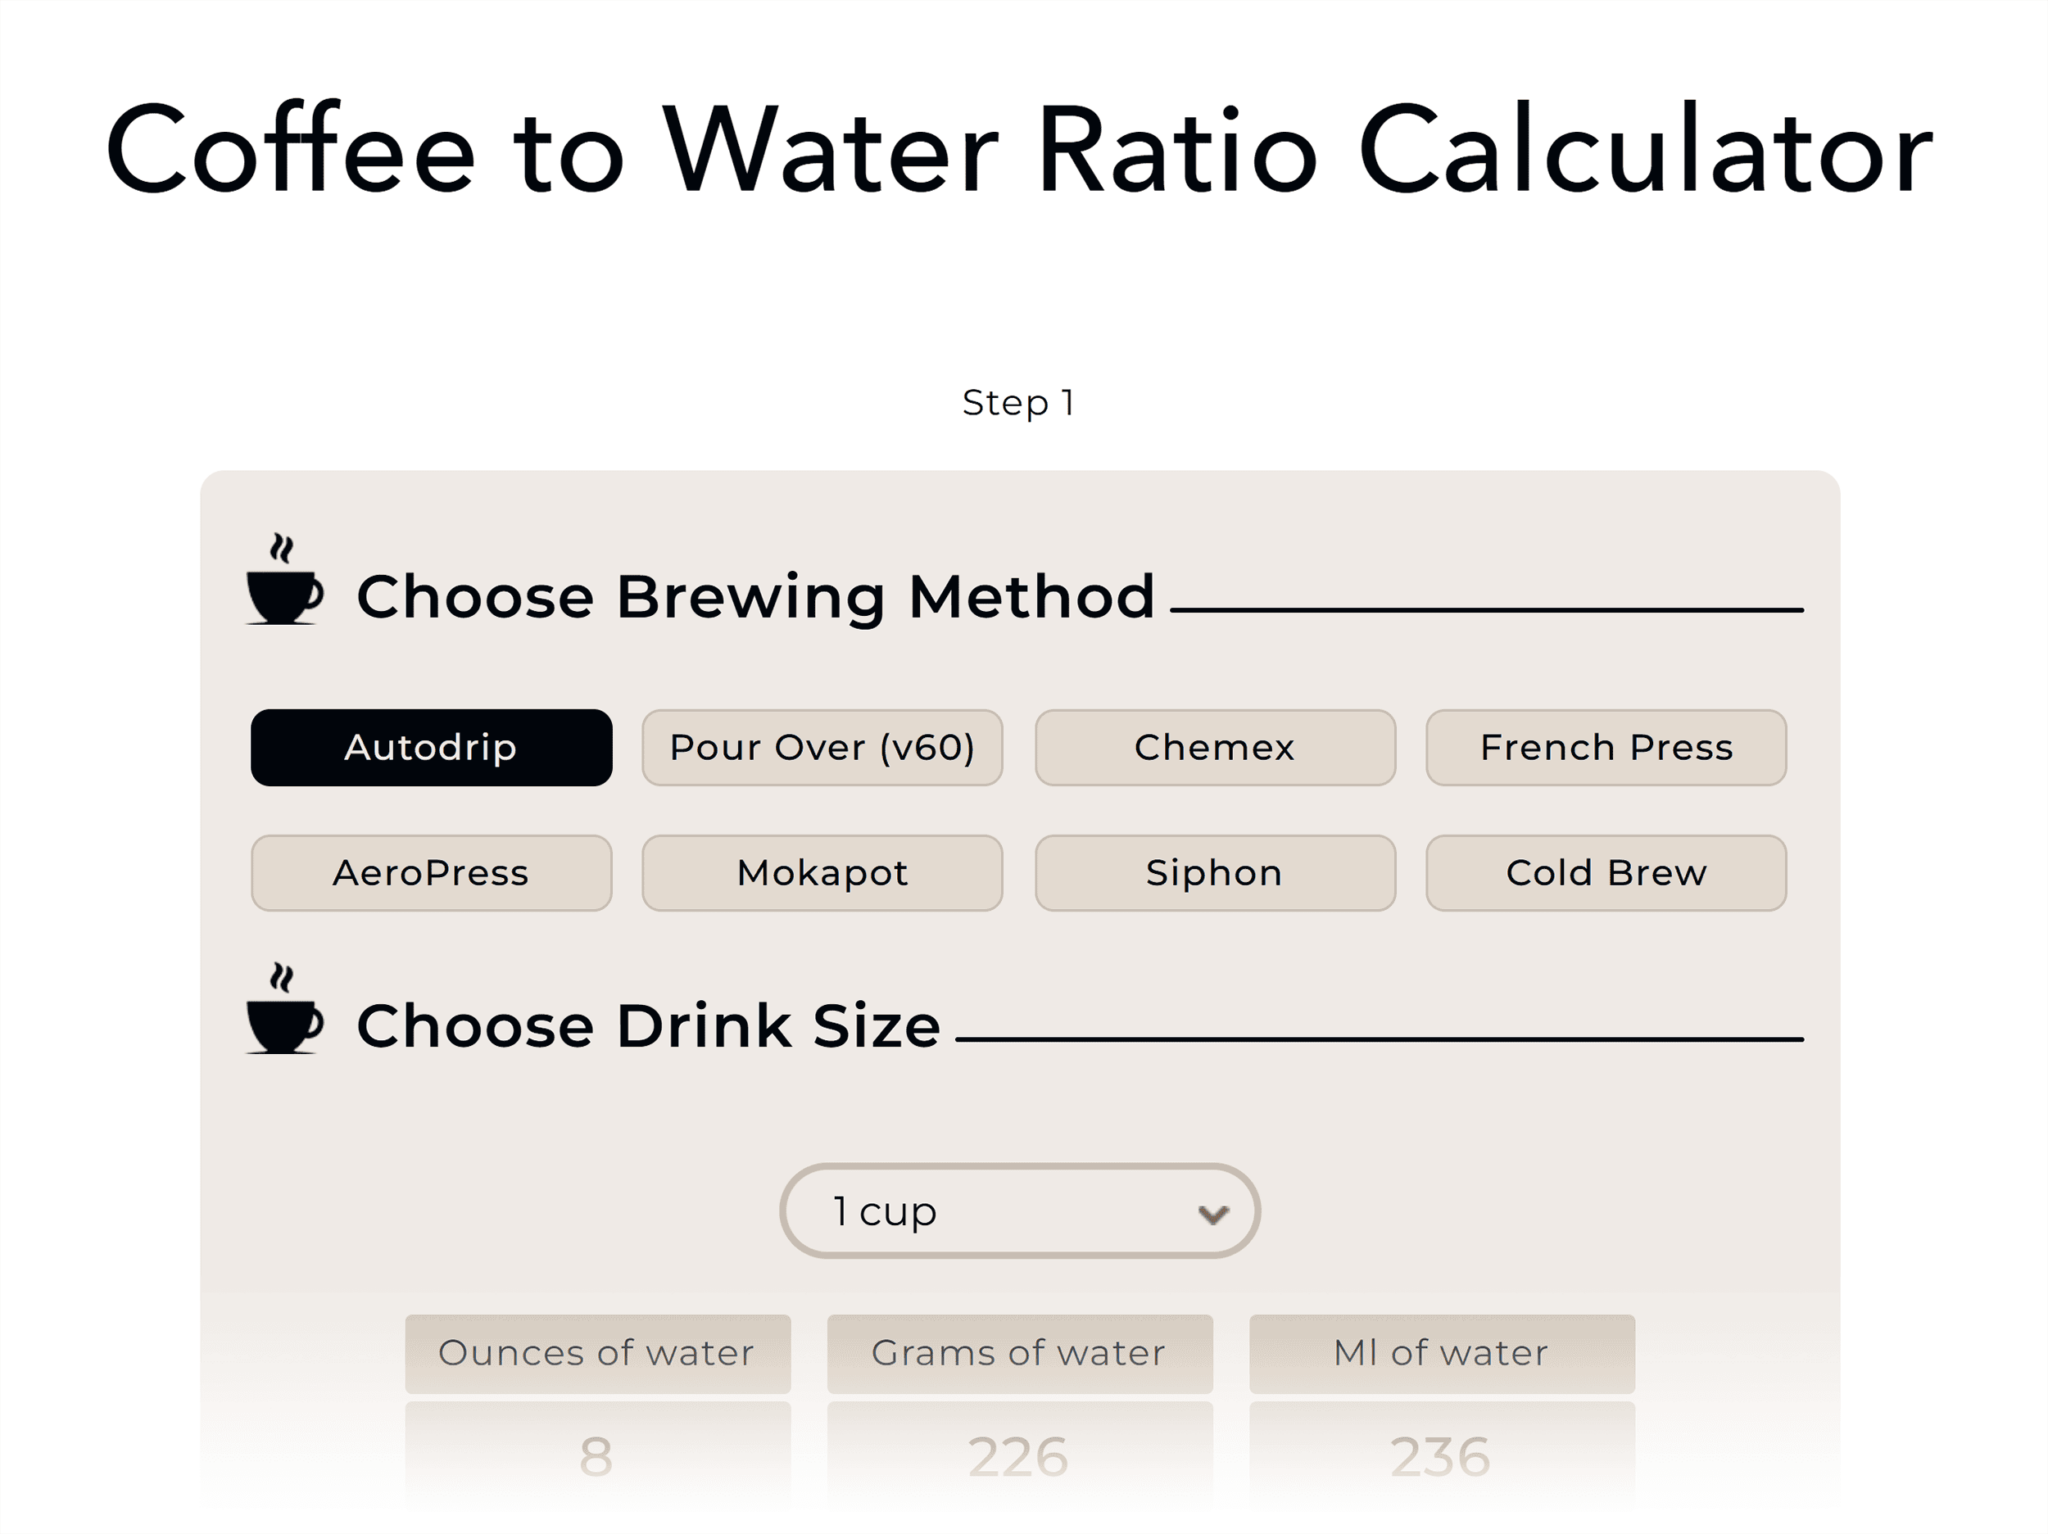 coffeebros-coffee-to-water-ratio-calculator 22 Content Marketing Examples to Inspire You